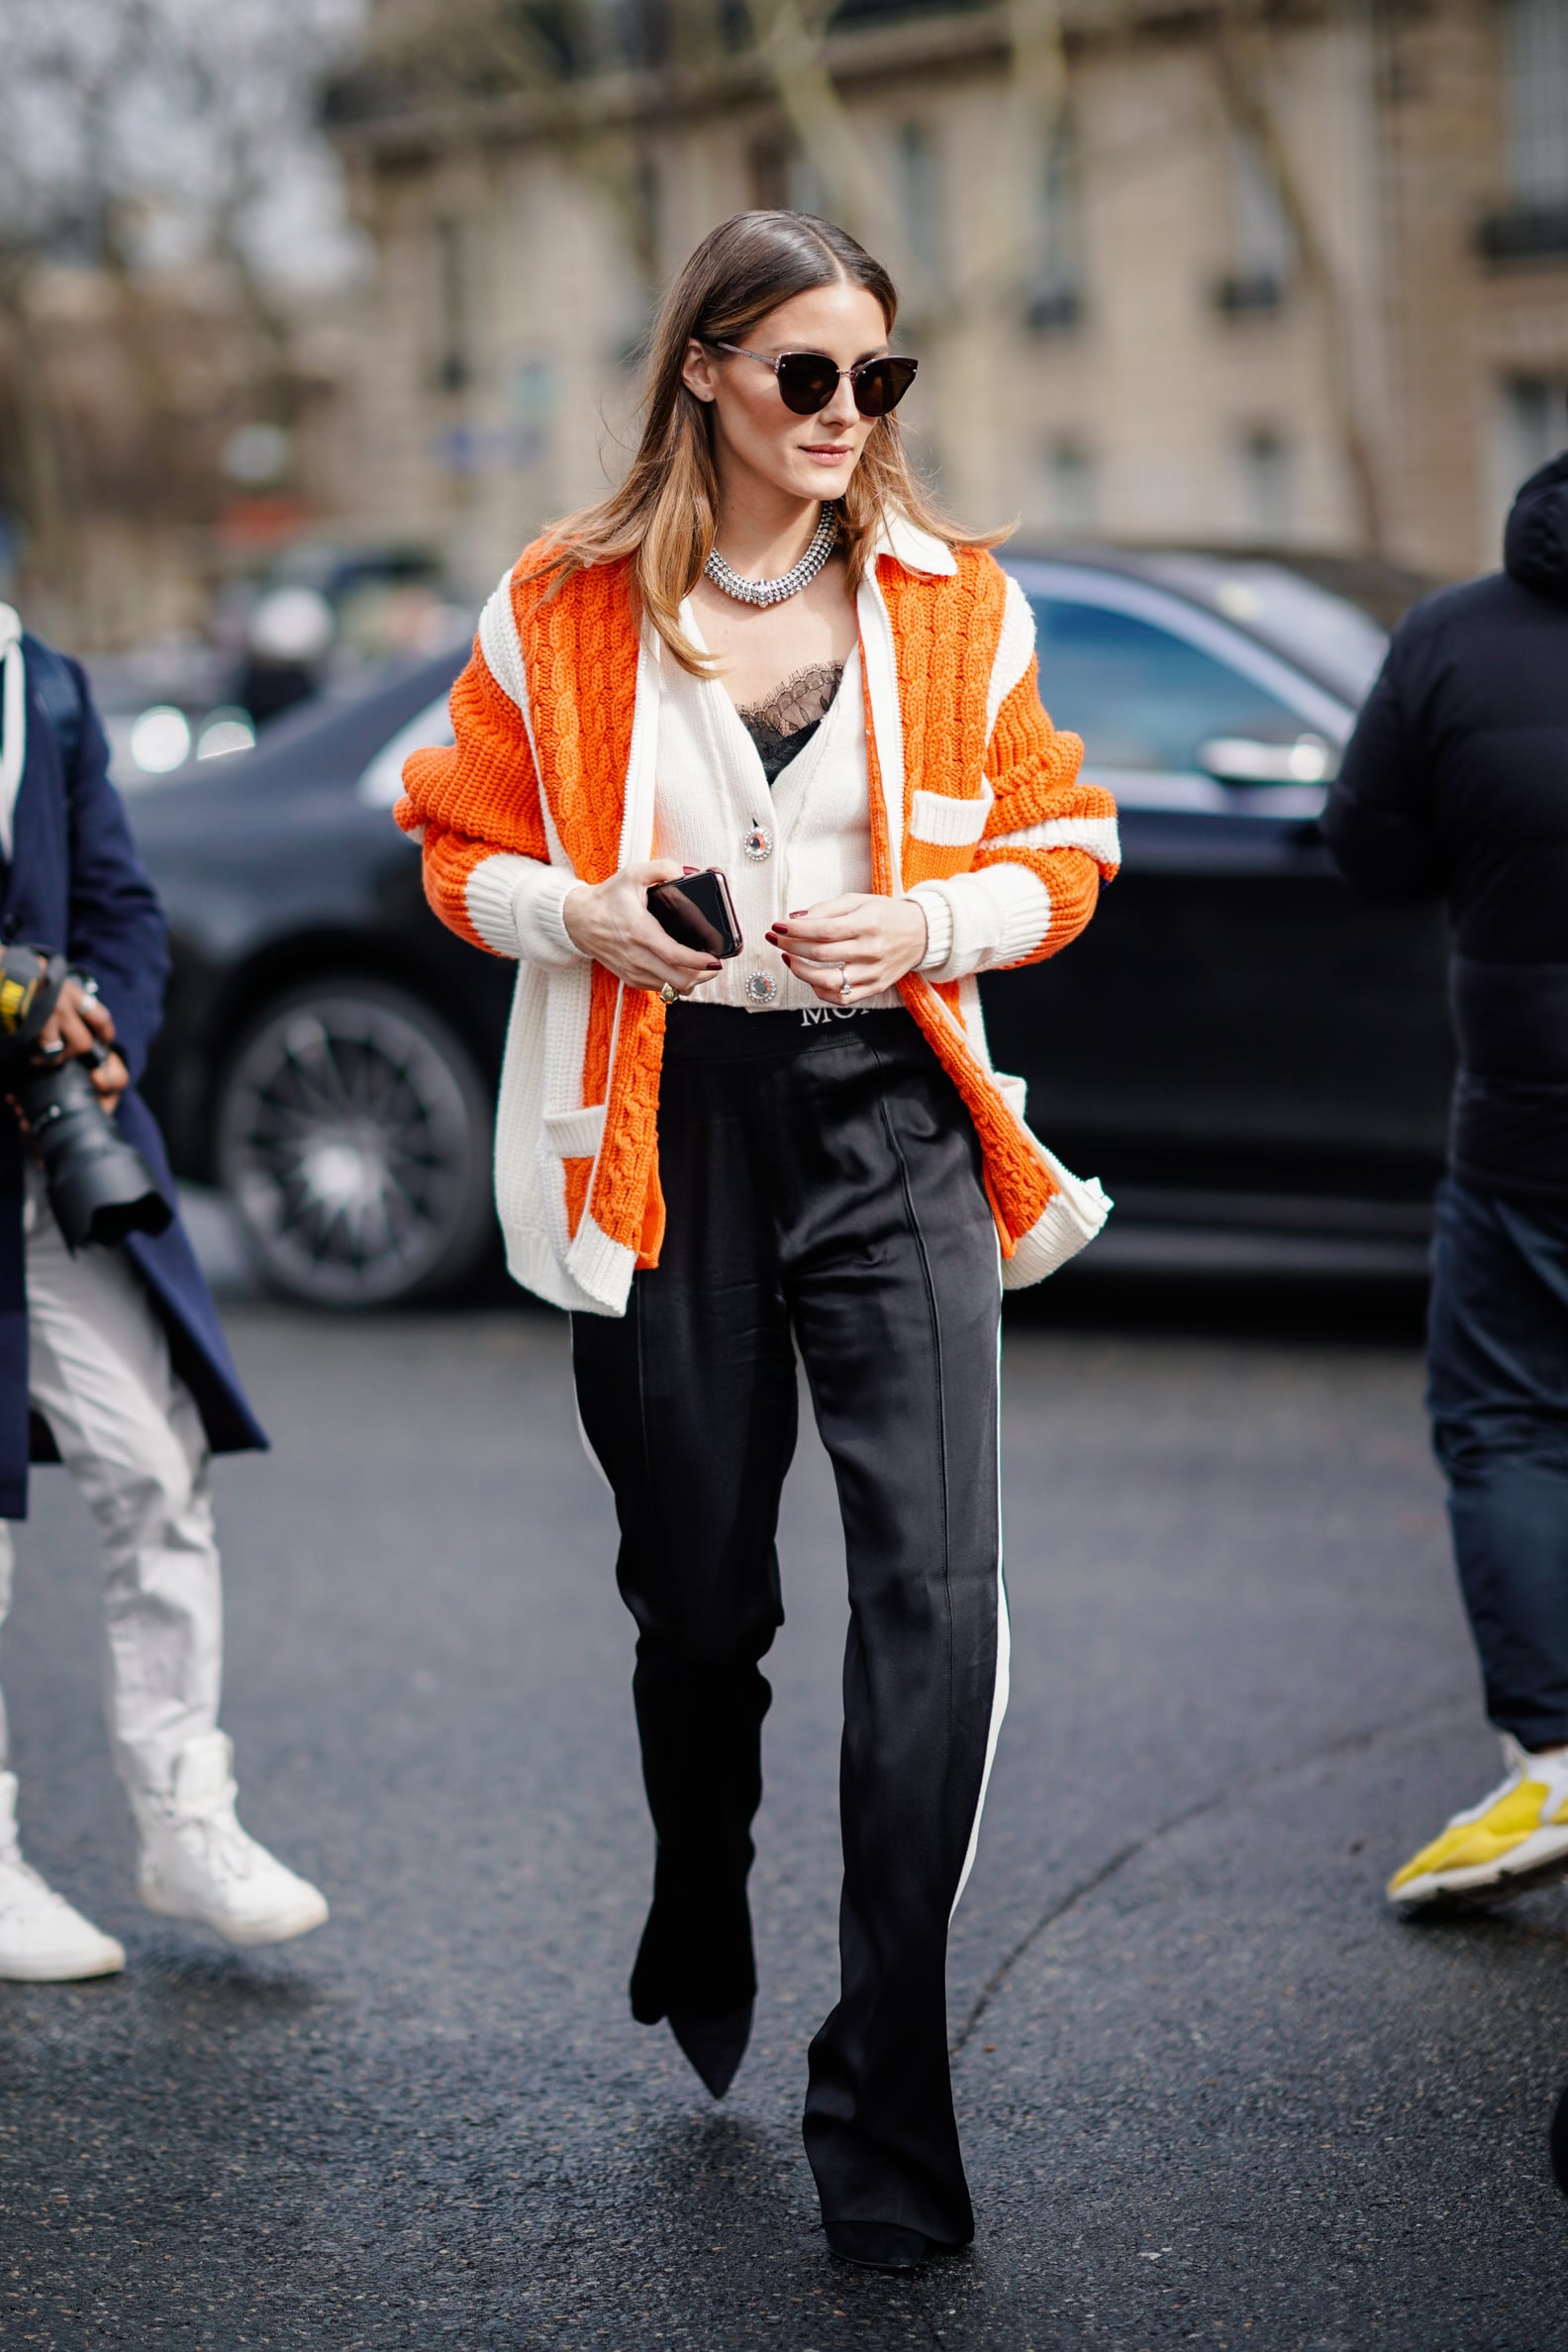 How to Wear the Cardigan Trend of Winter 2020 | POPSUGAR Fashion